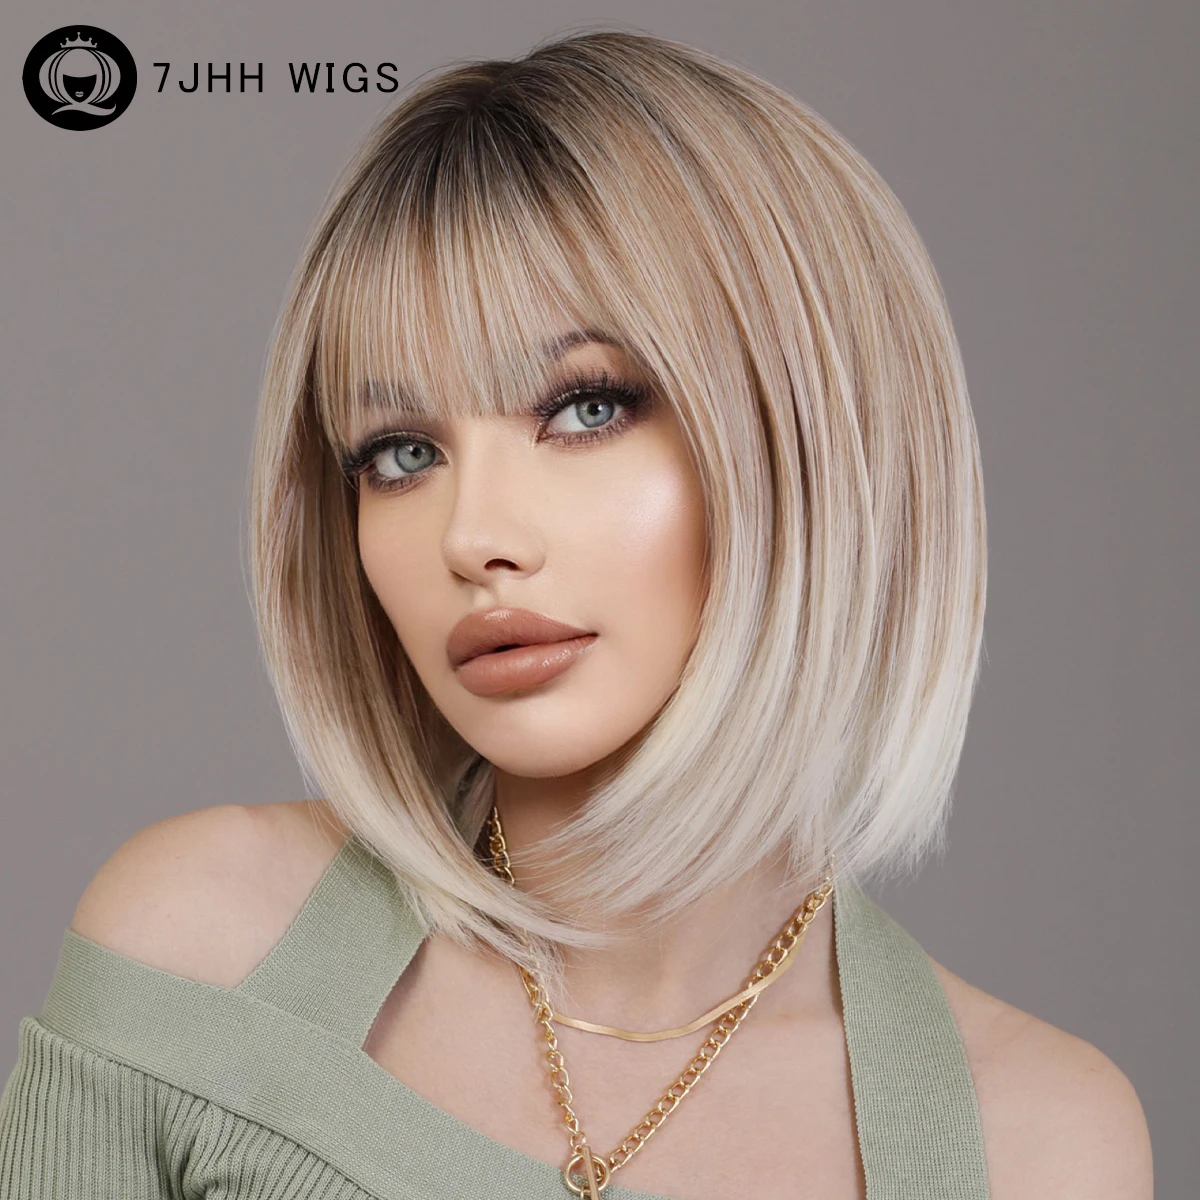 

7JHH WIGS Ombre Blonde Bob Wig Synthetic Short Pink Wigs with Fluffy Bangs for Women Daily Party Heat Resistant Fiber